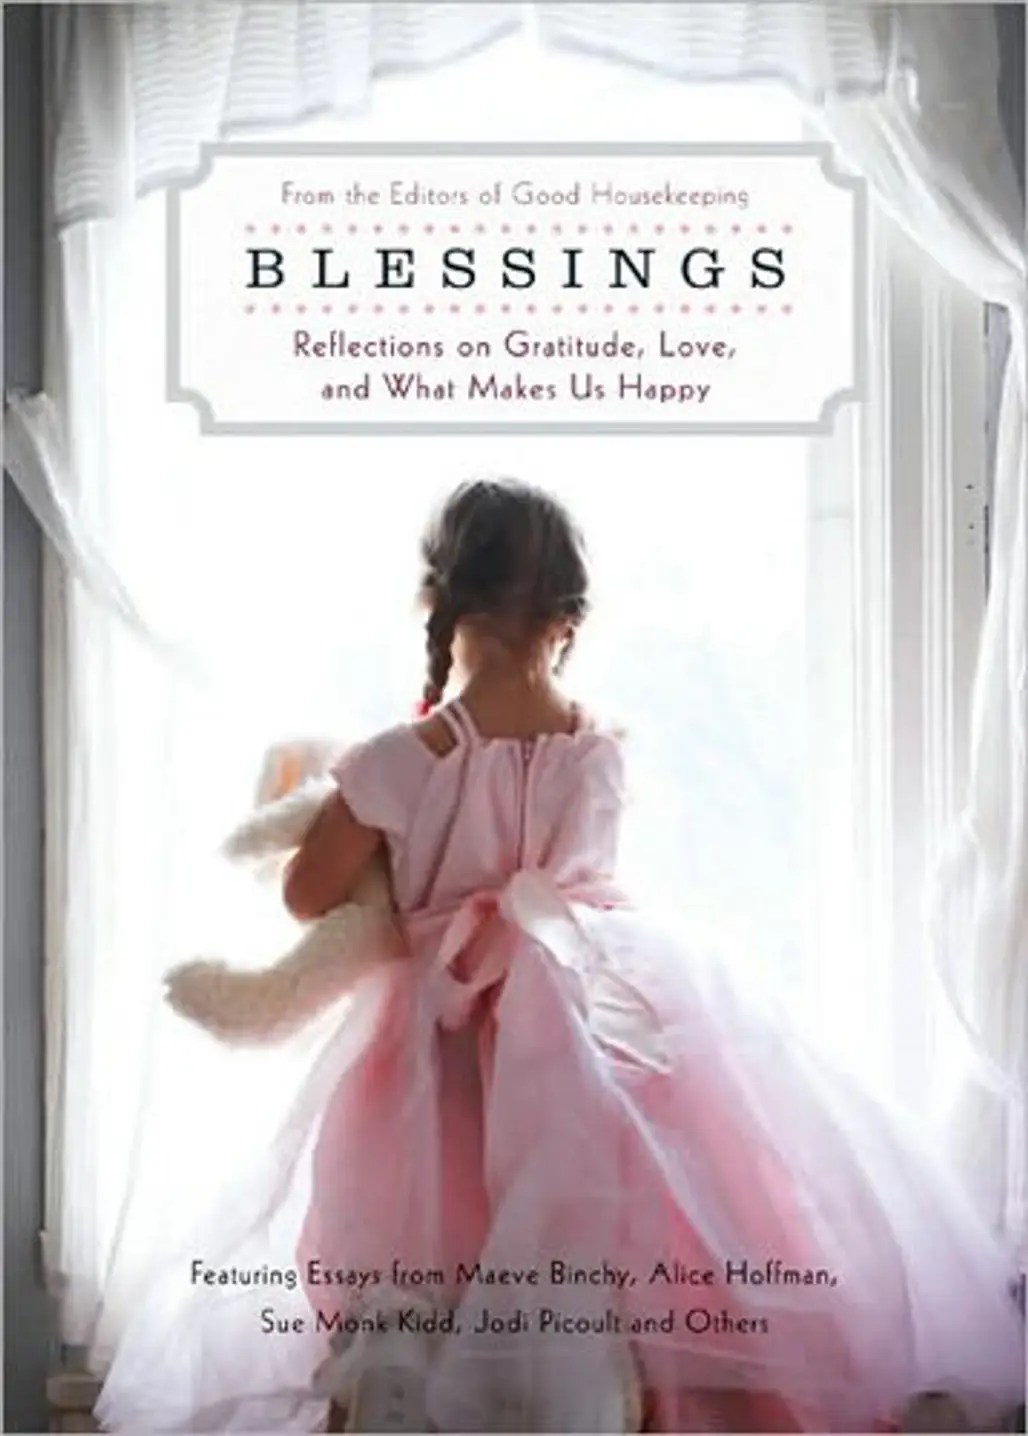 “Blessings: Reflections on Gratitude, Love, and What Makes Us Happy”